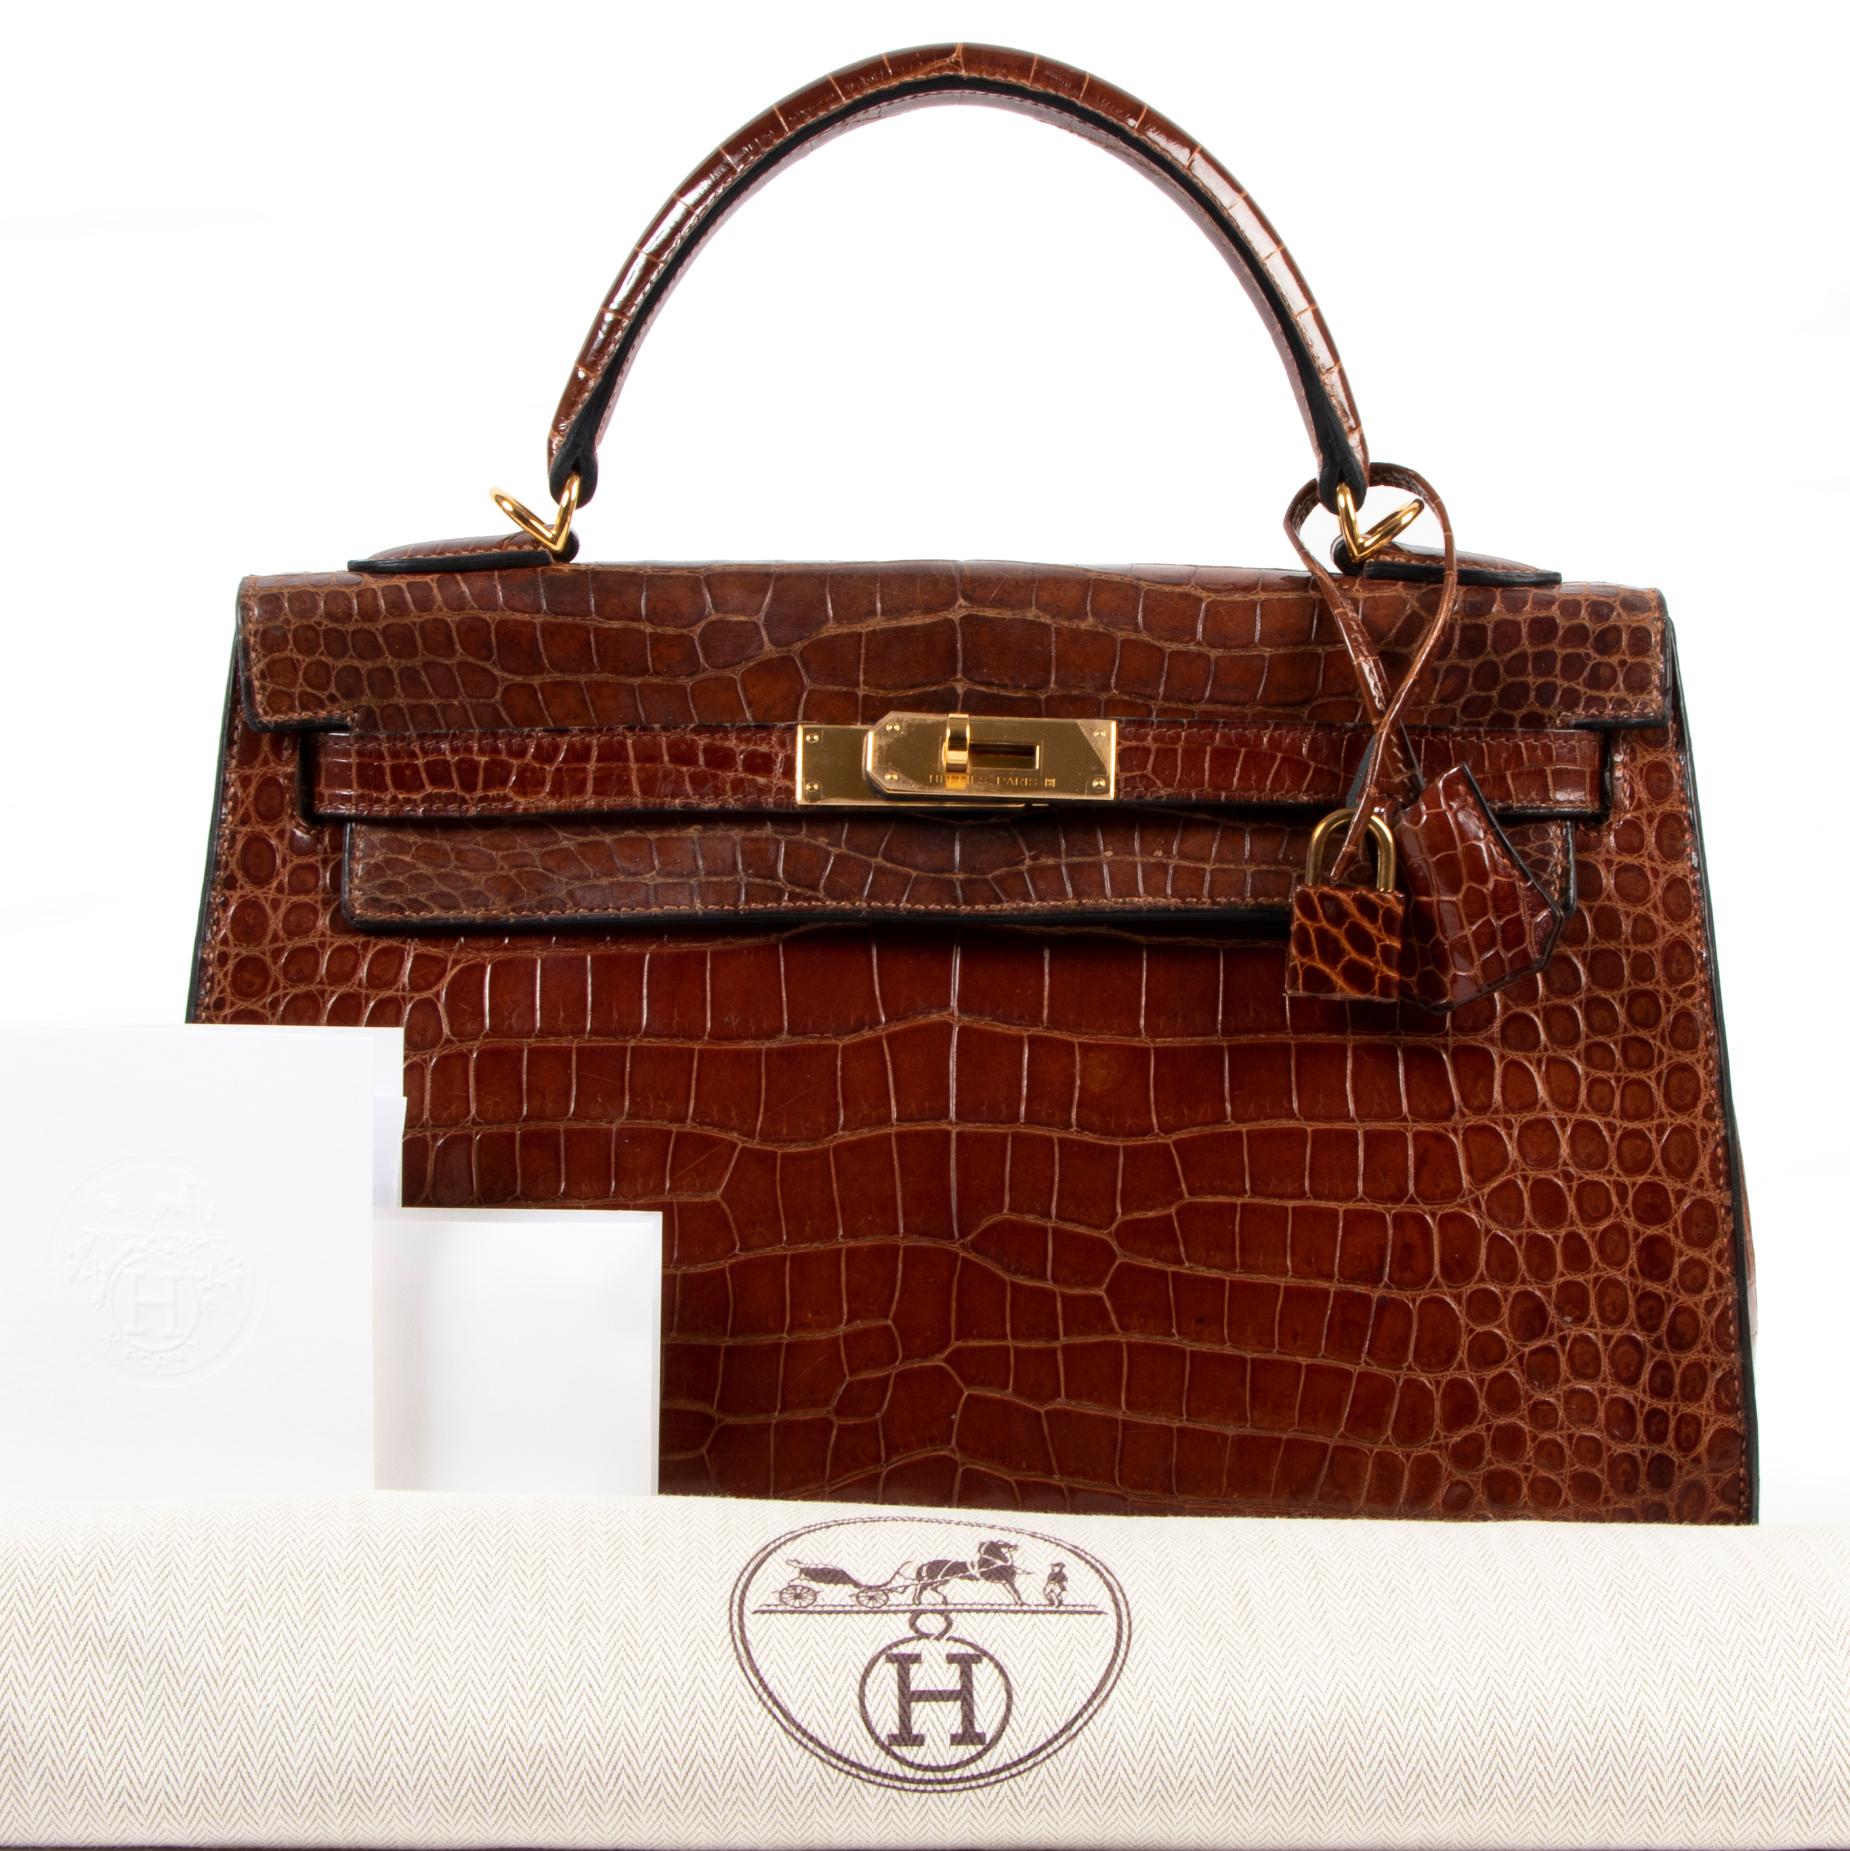 Good condition

Hermes Kelly 32 Miel Crocodile GHW

A must for any serious collector.
You will only very seldom see a Kelly bag in this beautiful warm 